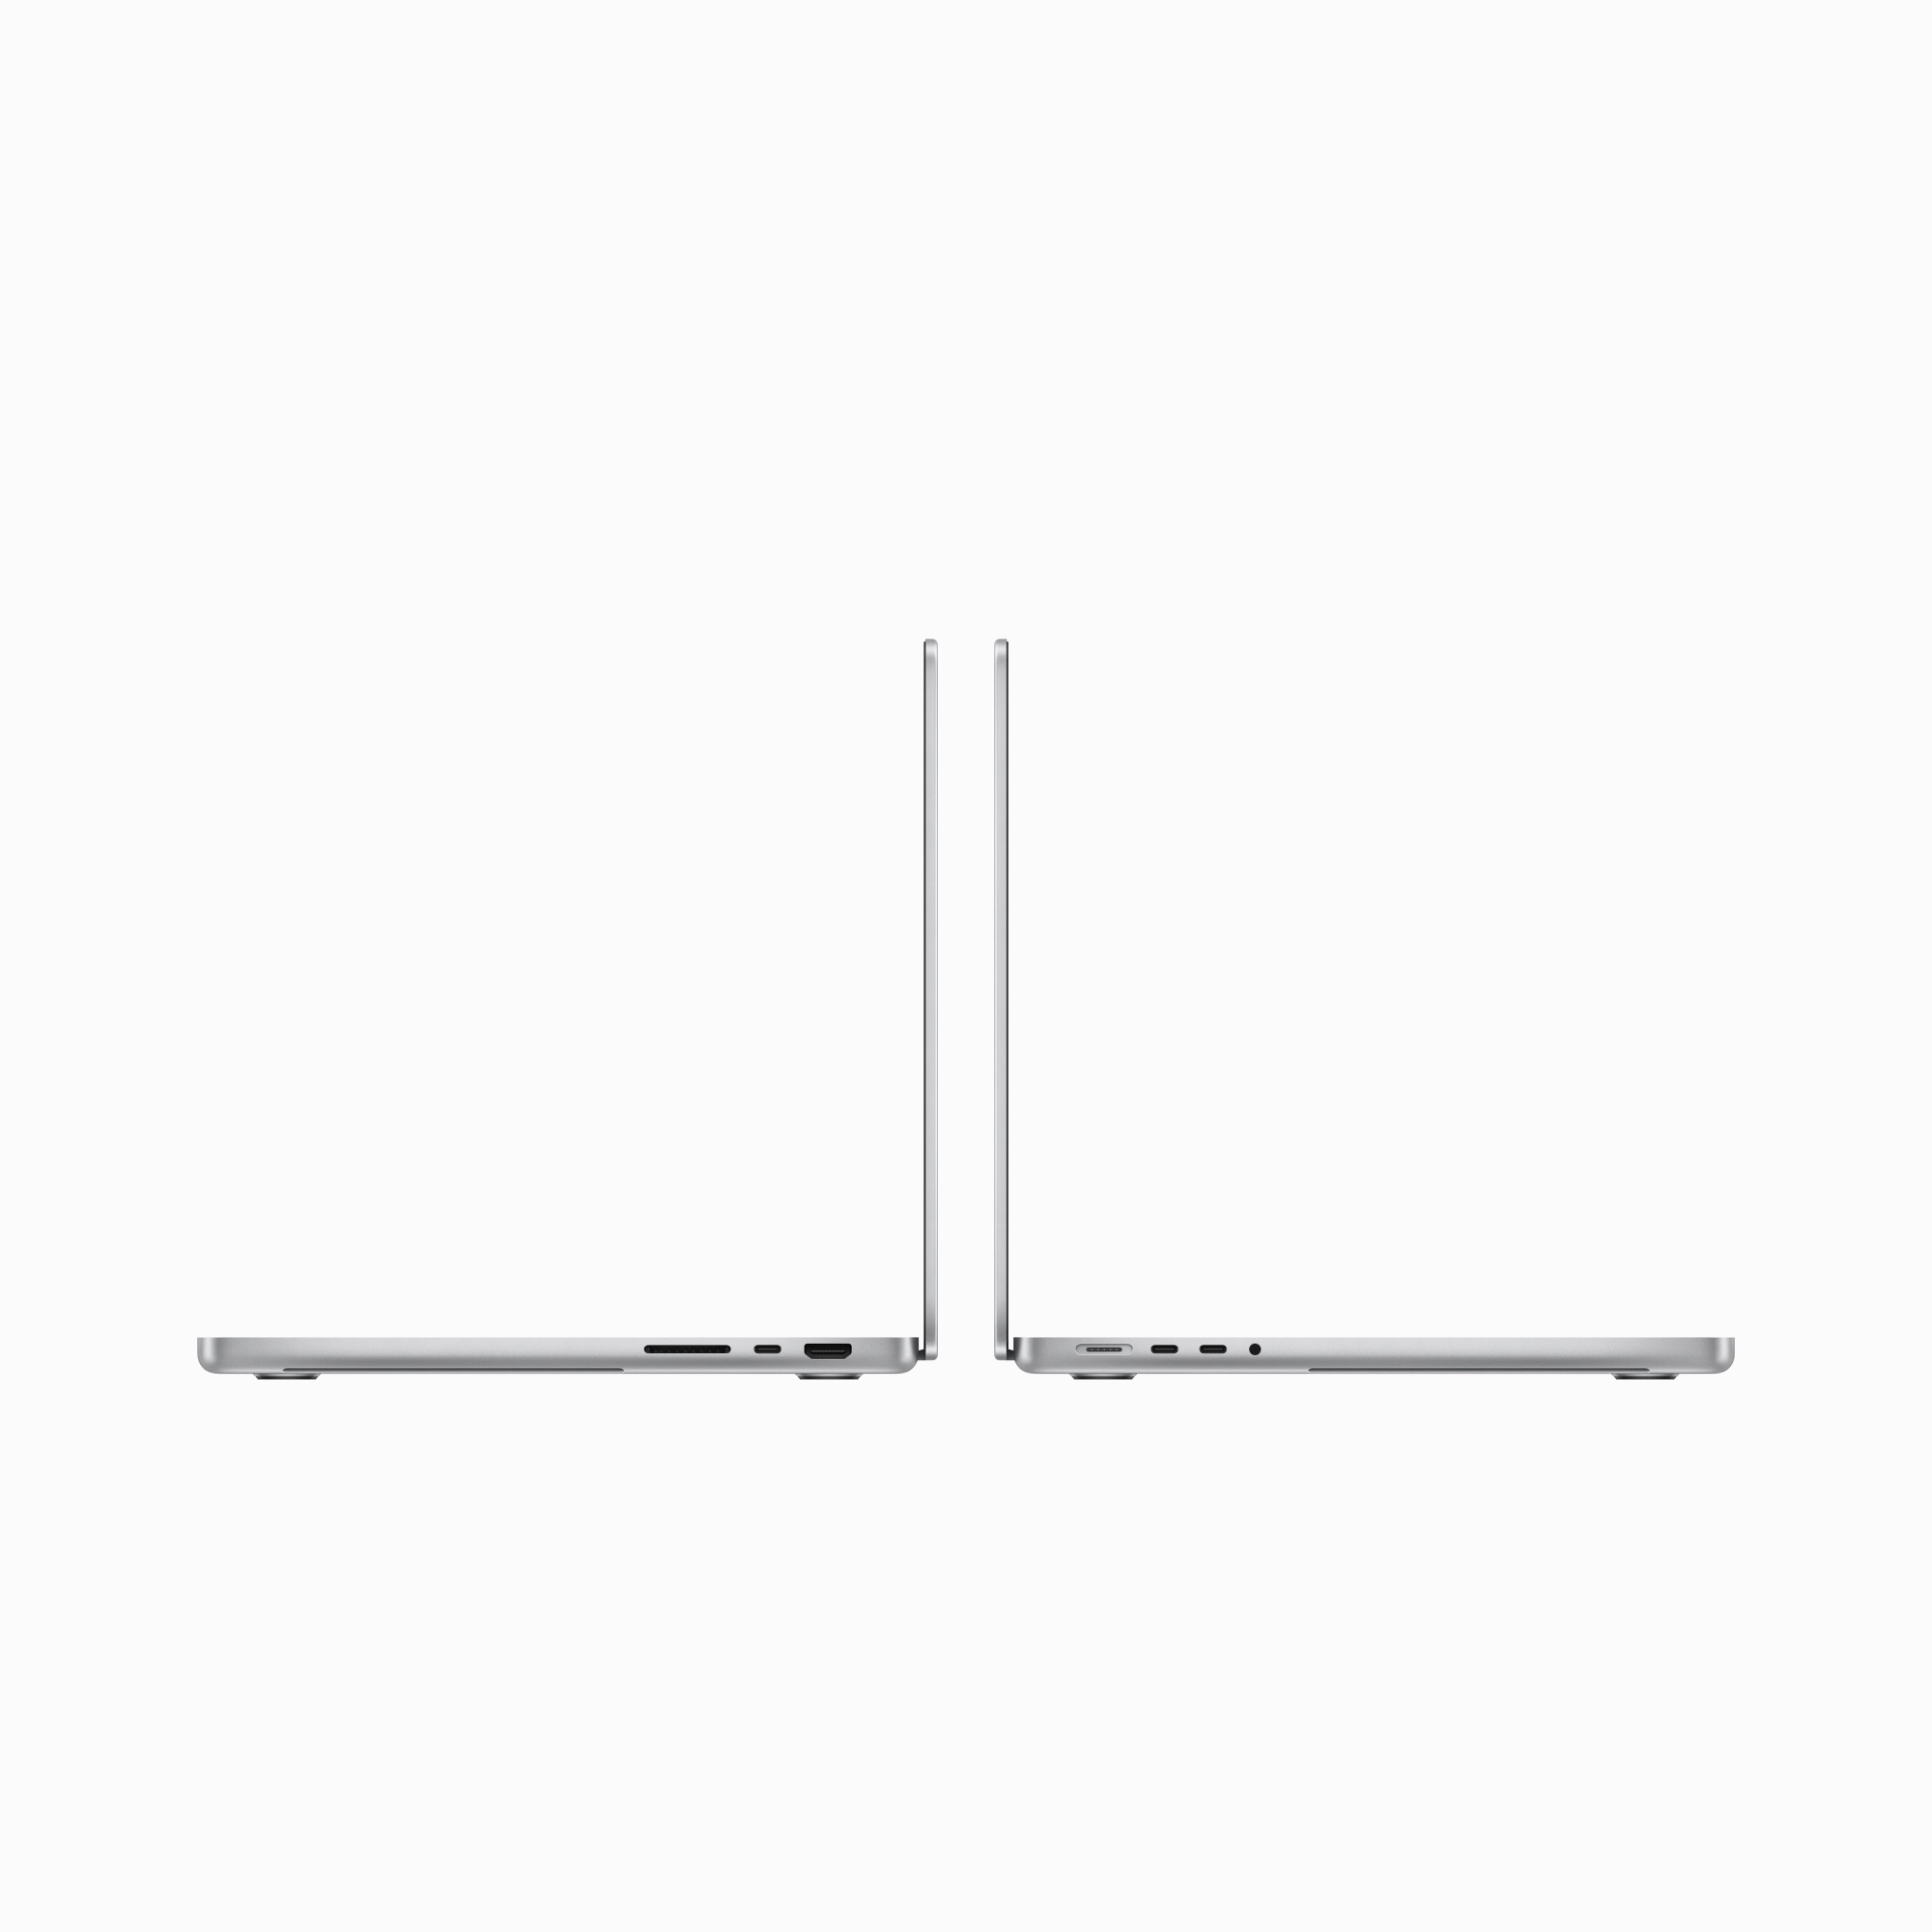 14-inch MacBook Pro: Apple M3 Pro chip with 11c CPU and 14c GPU, 512GB SSD - Silver